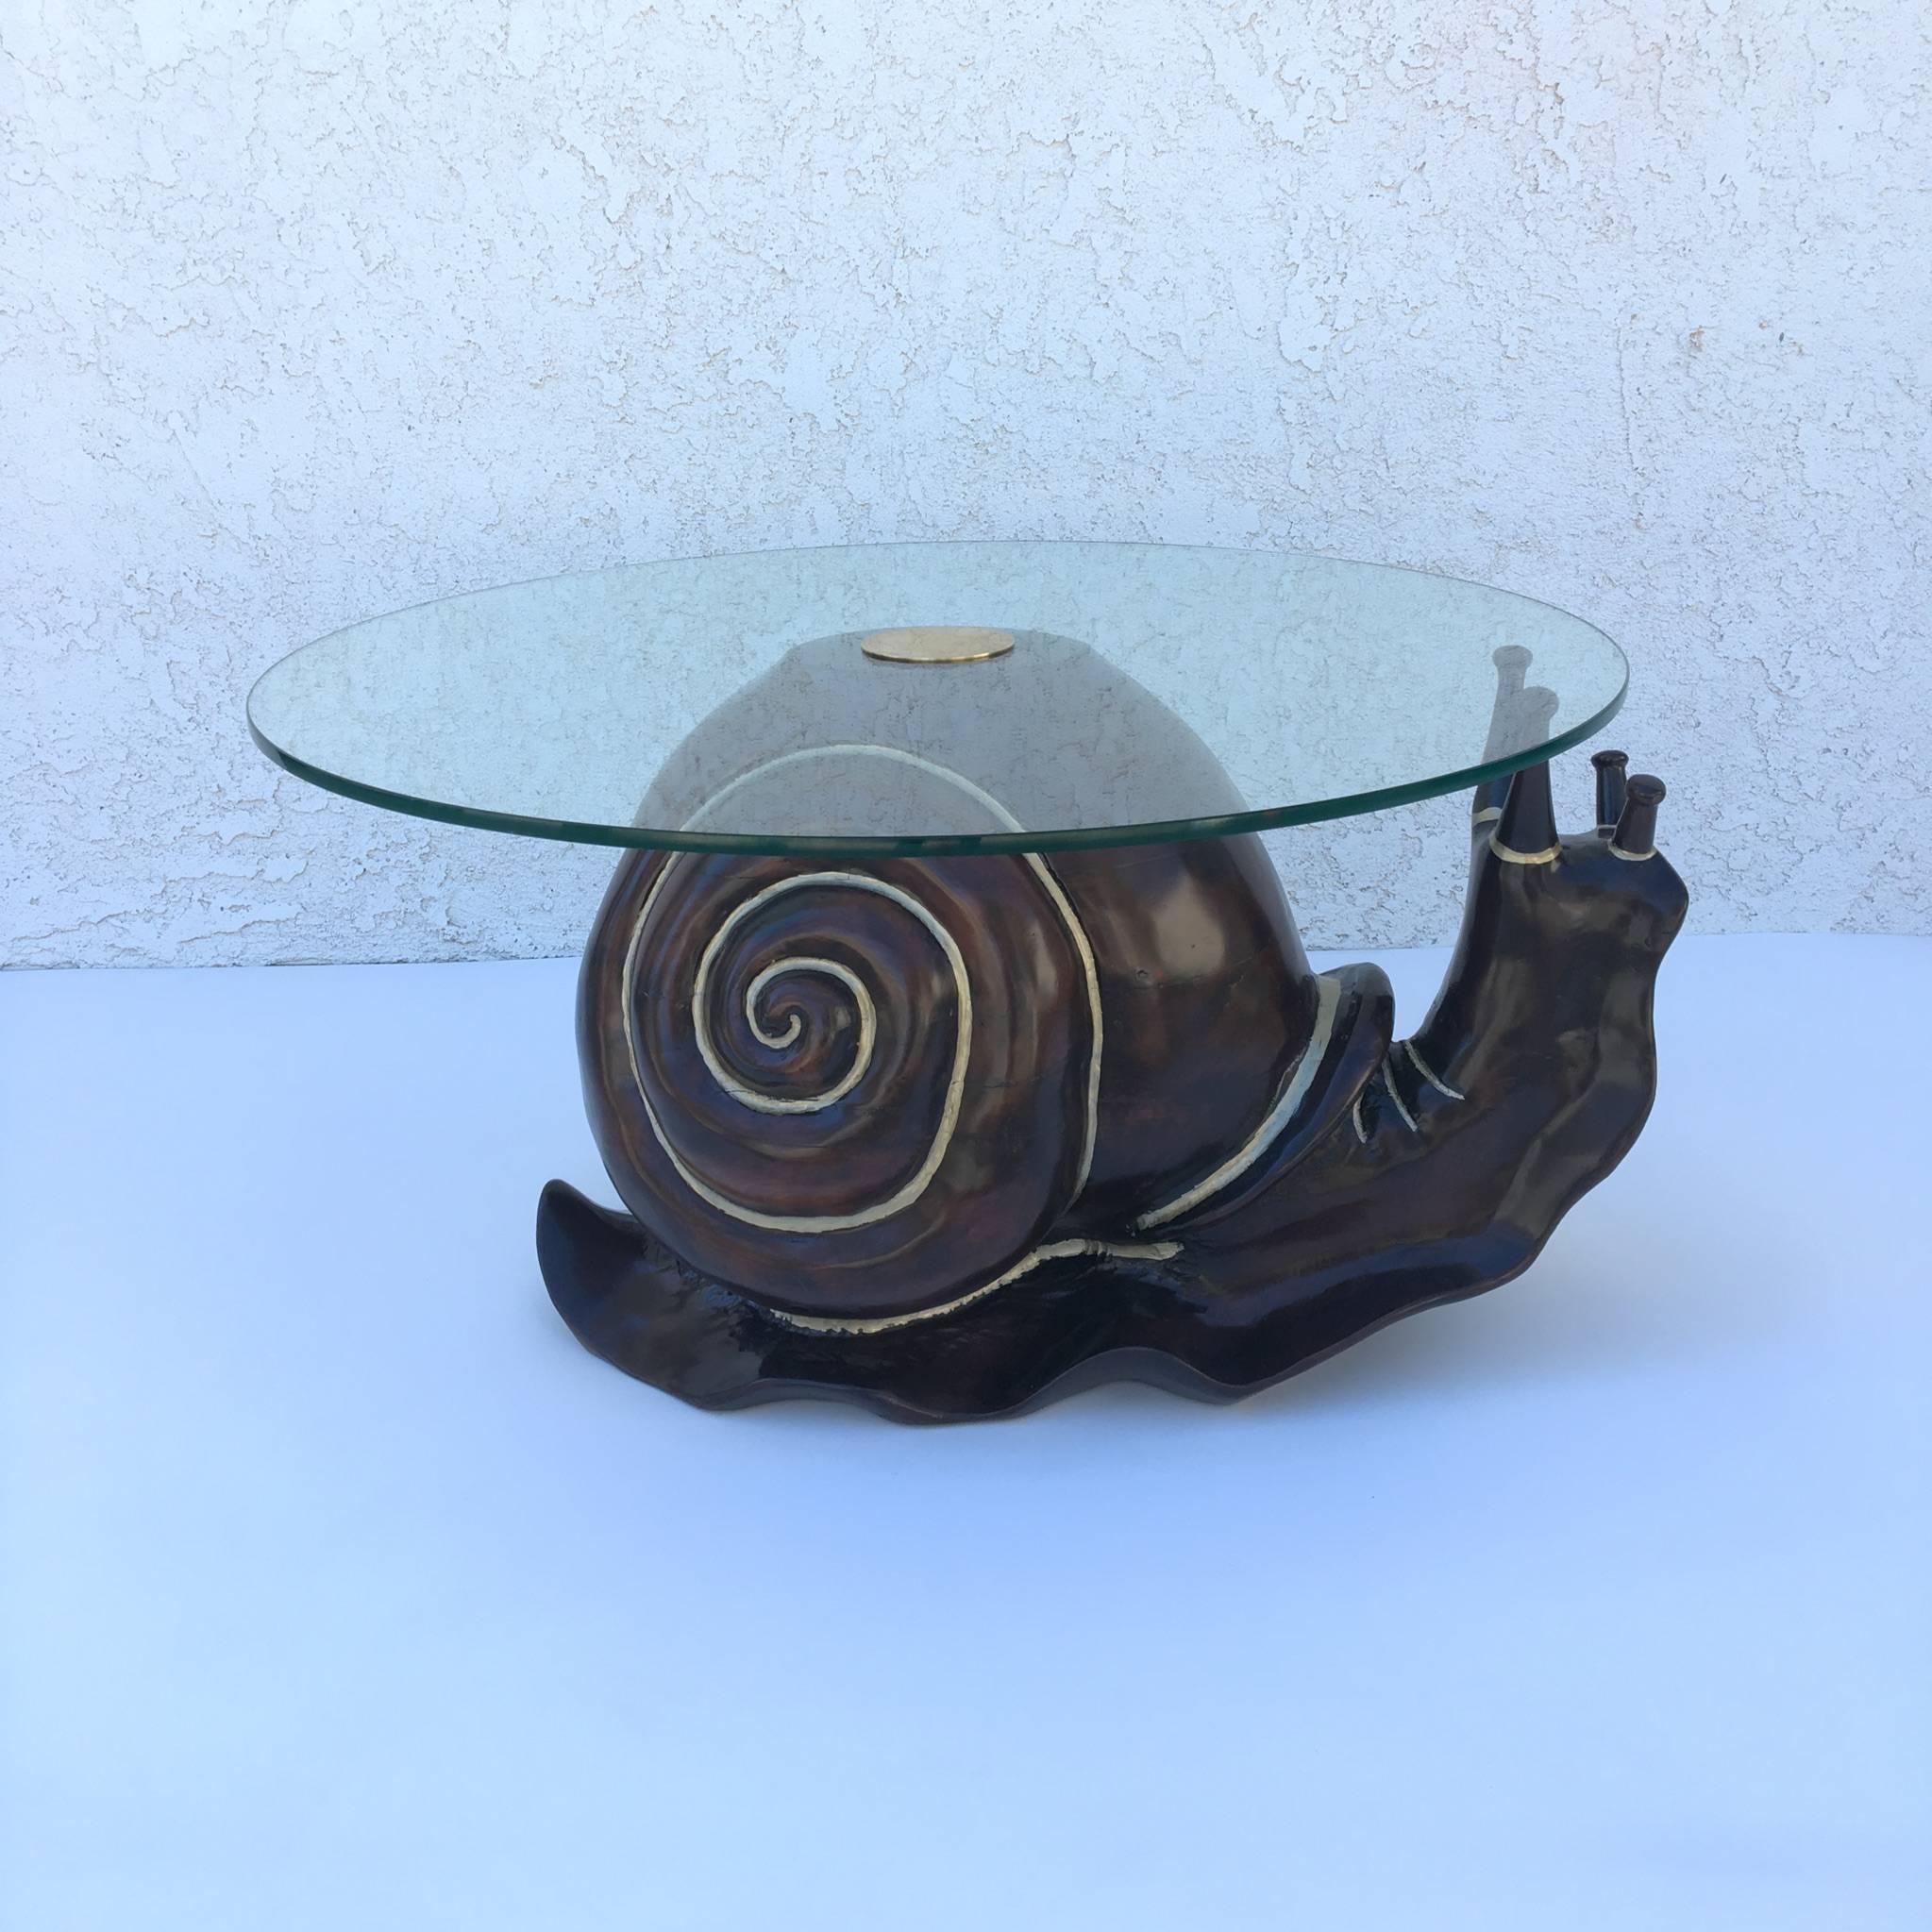 Late 20th Century Carved Pinewood and Glass Snail Cocktail Table by Federico Armijo